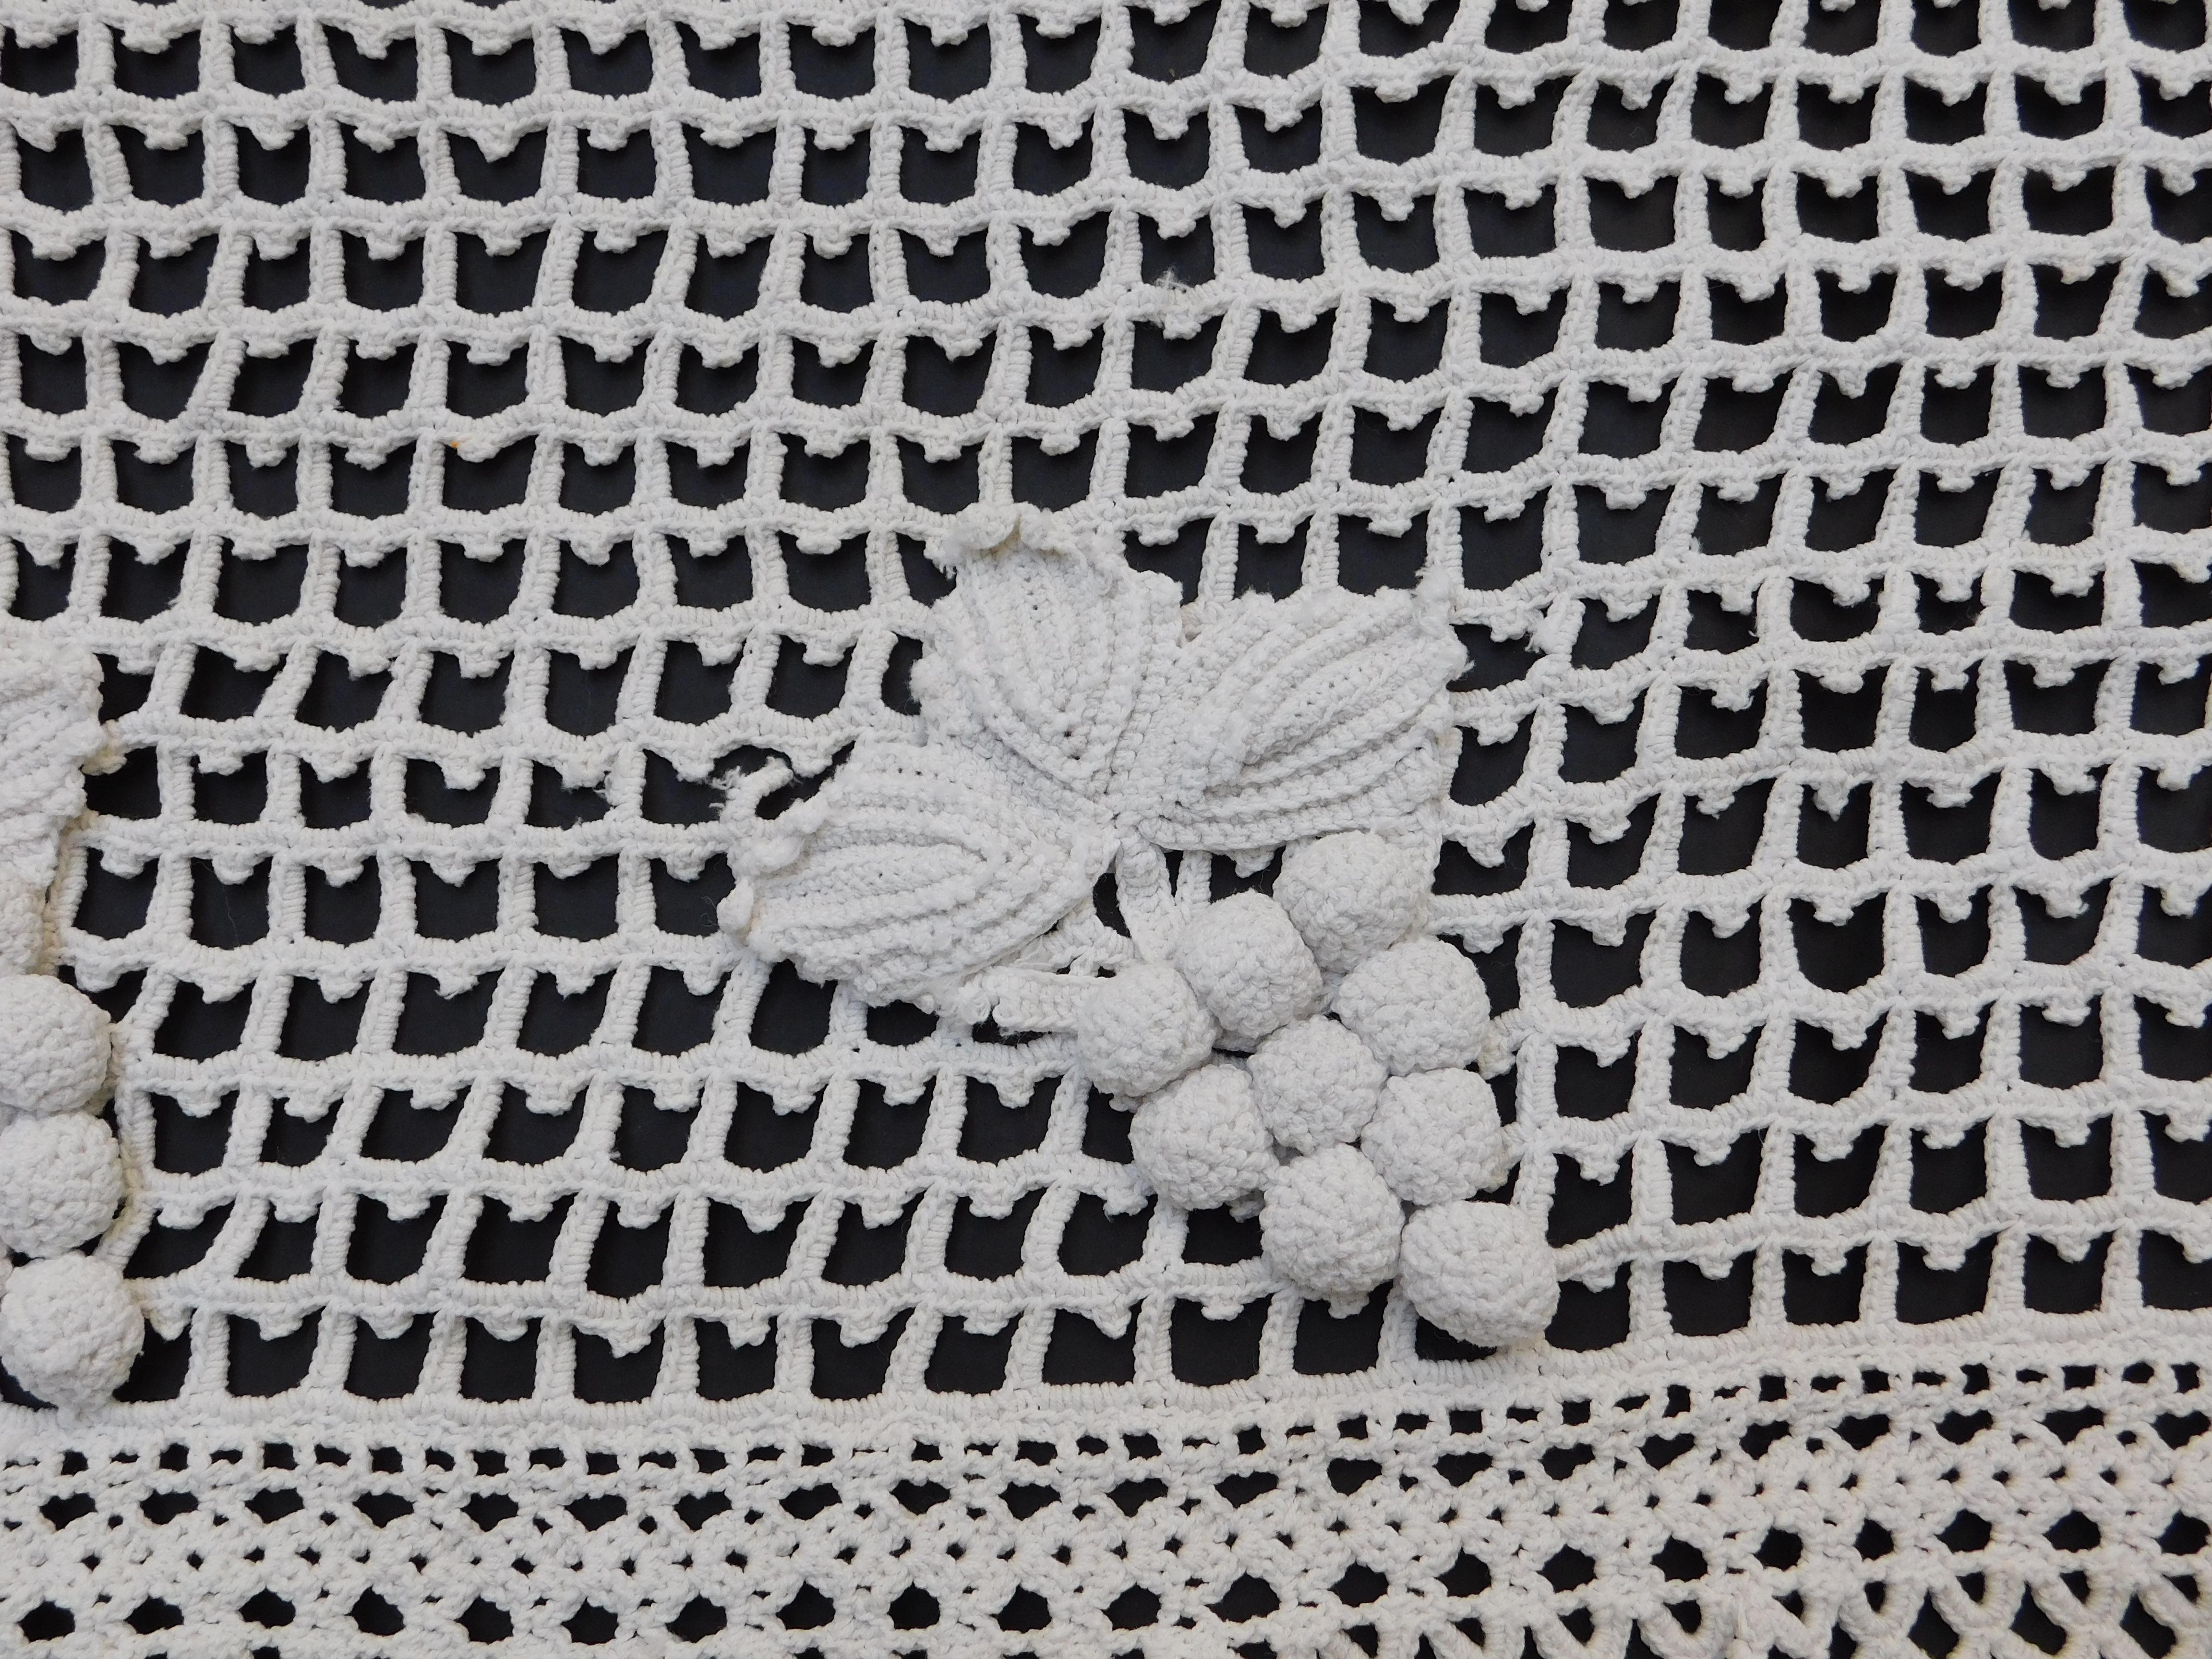 20th Century Vintage Spanish Crocheted Cotton Valance with Grapes For Sale